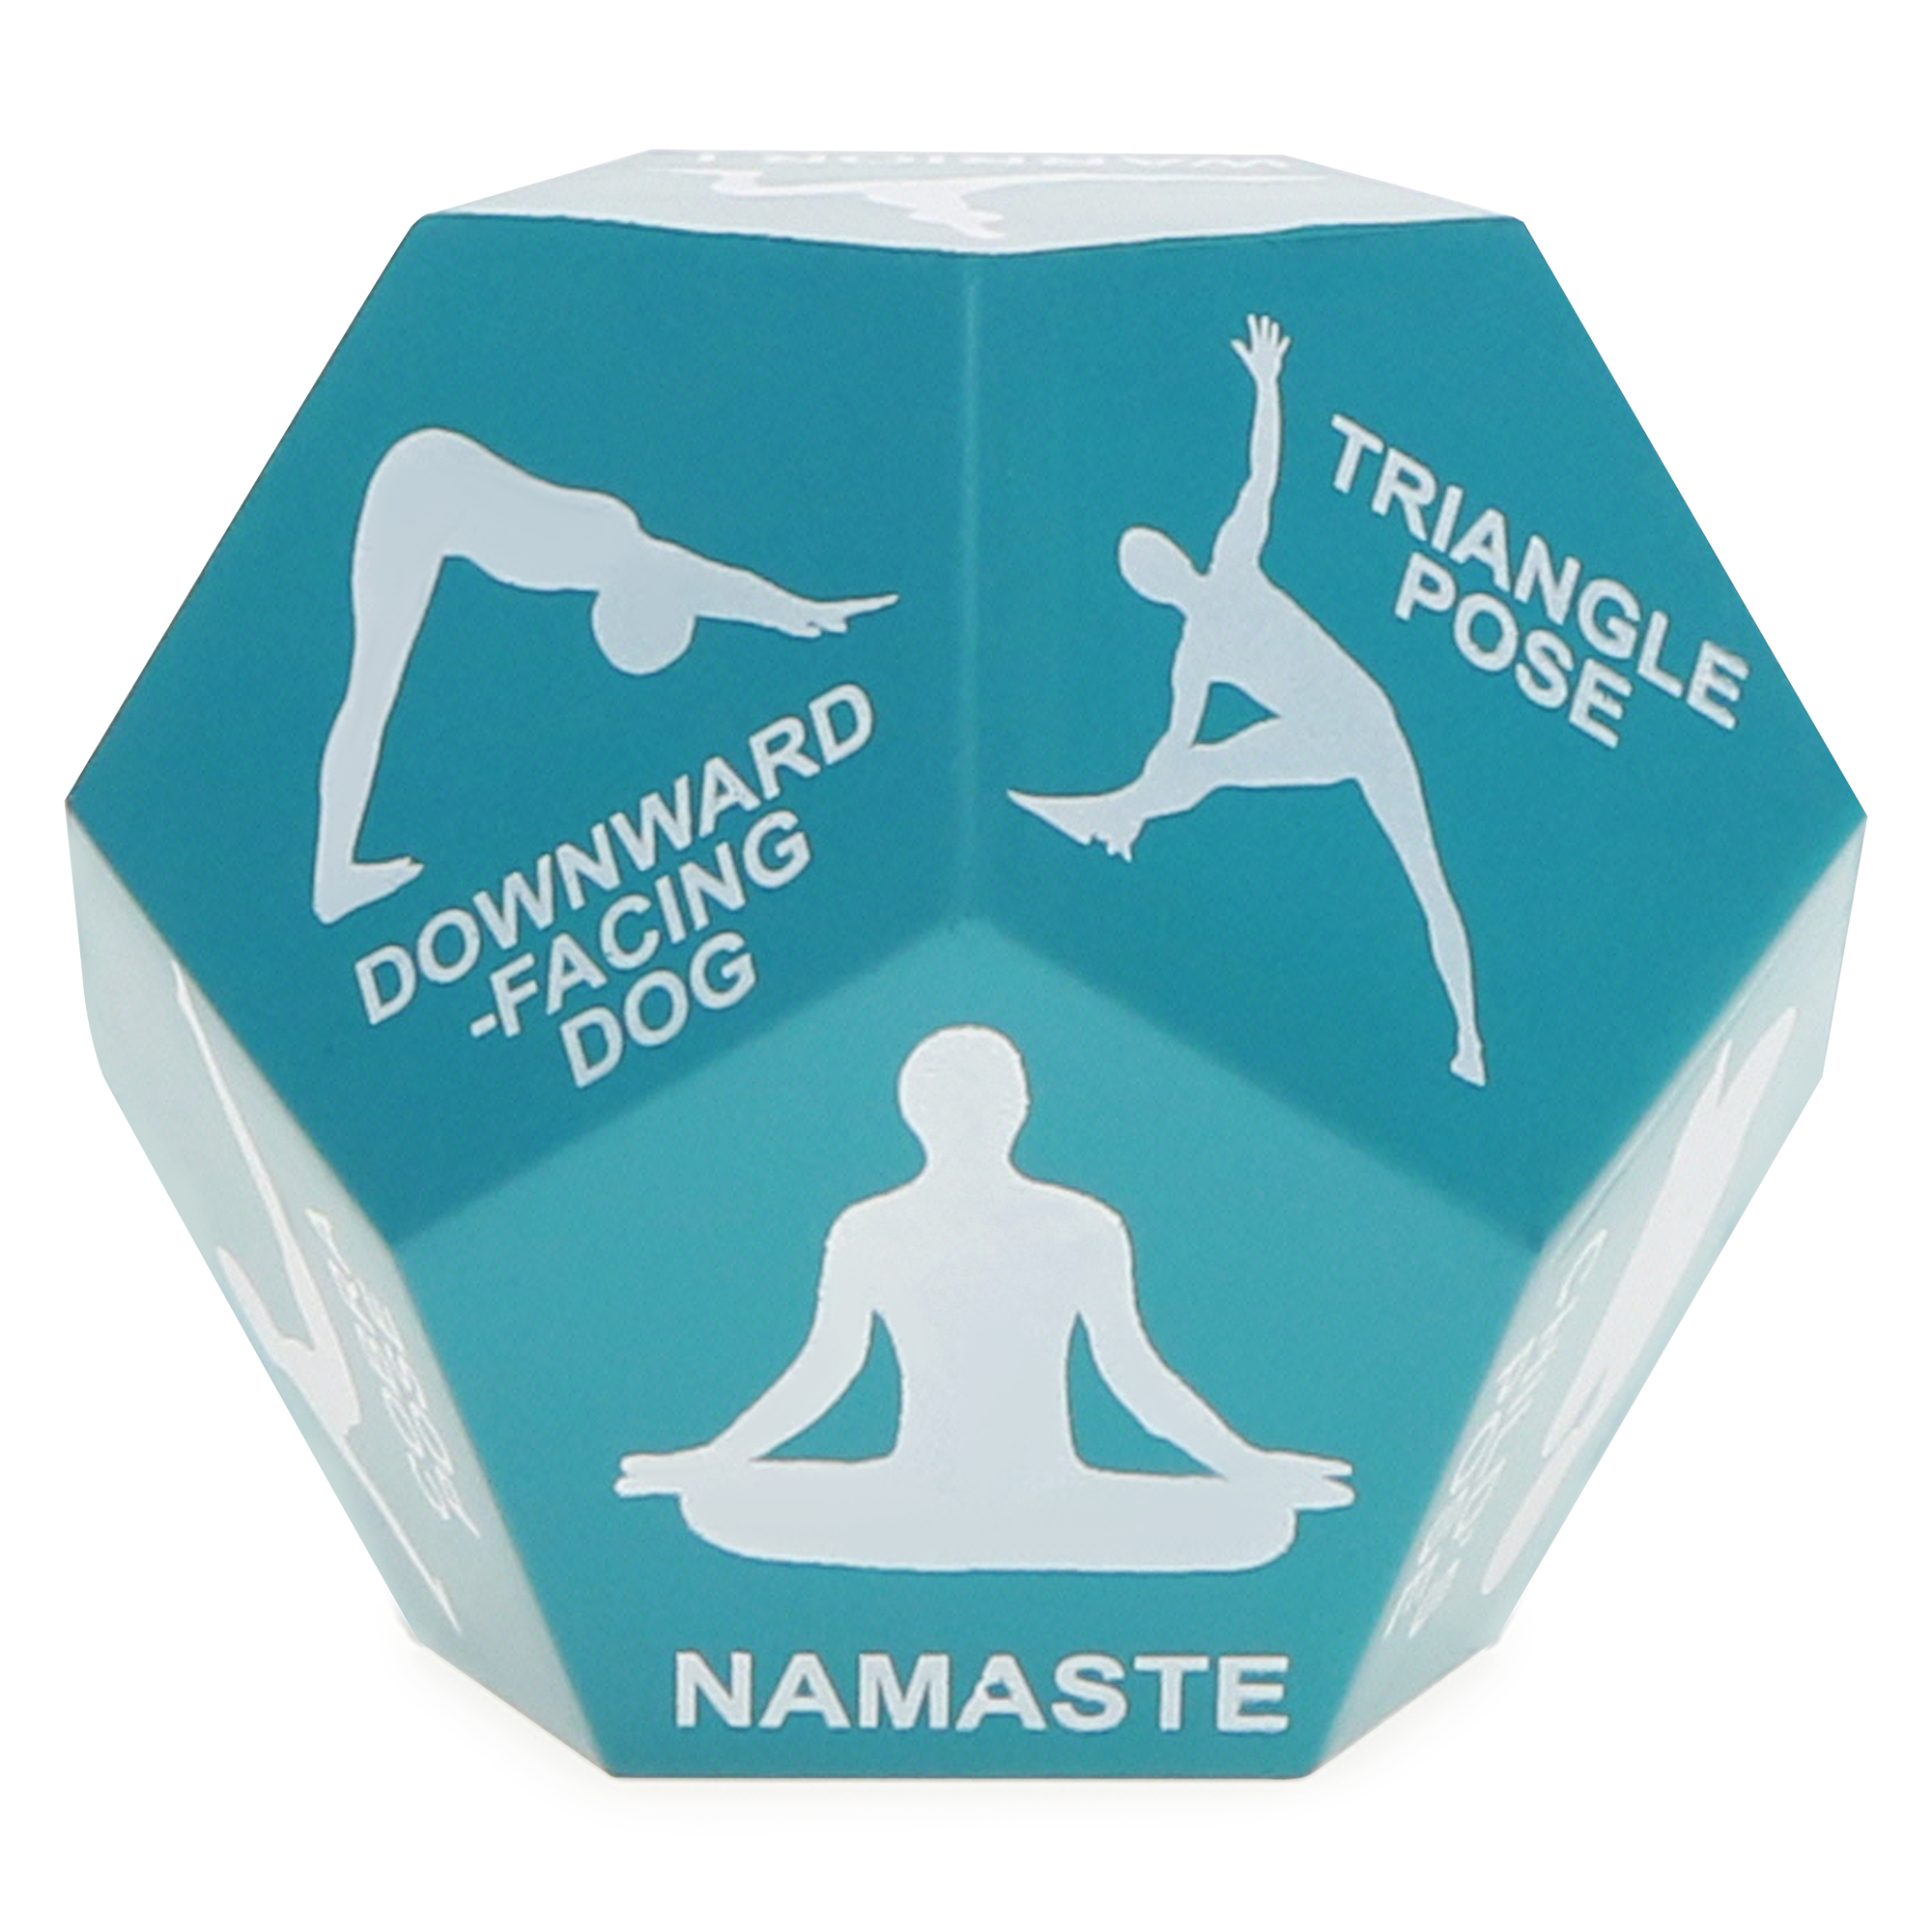 series-8 fitness™ 12-sided yoga dice